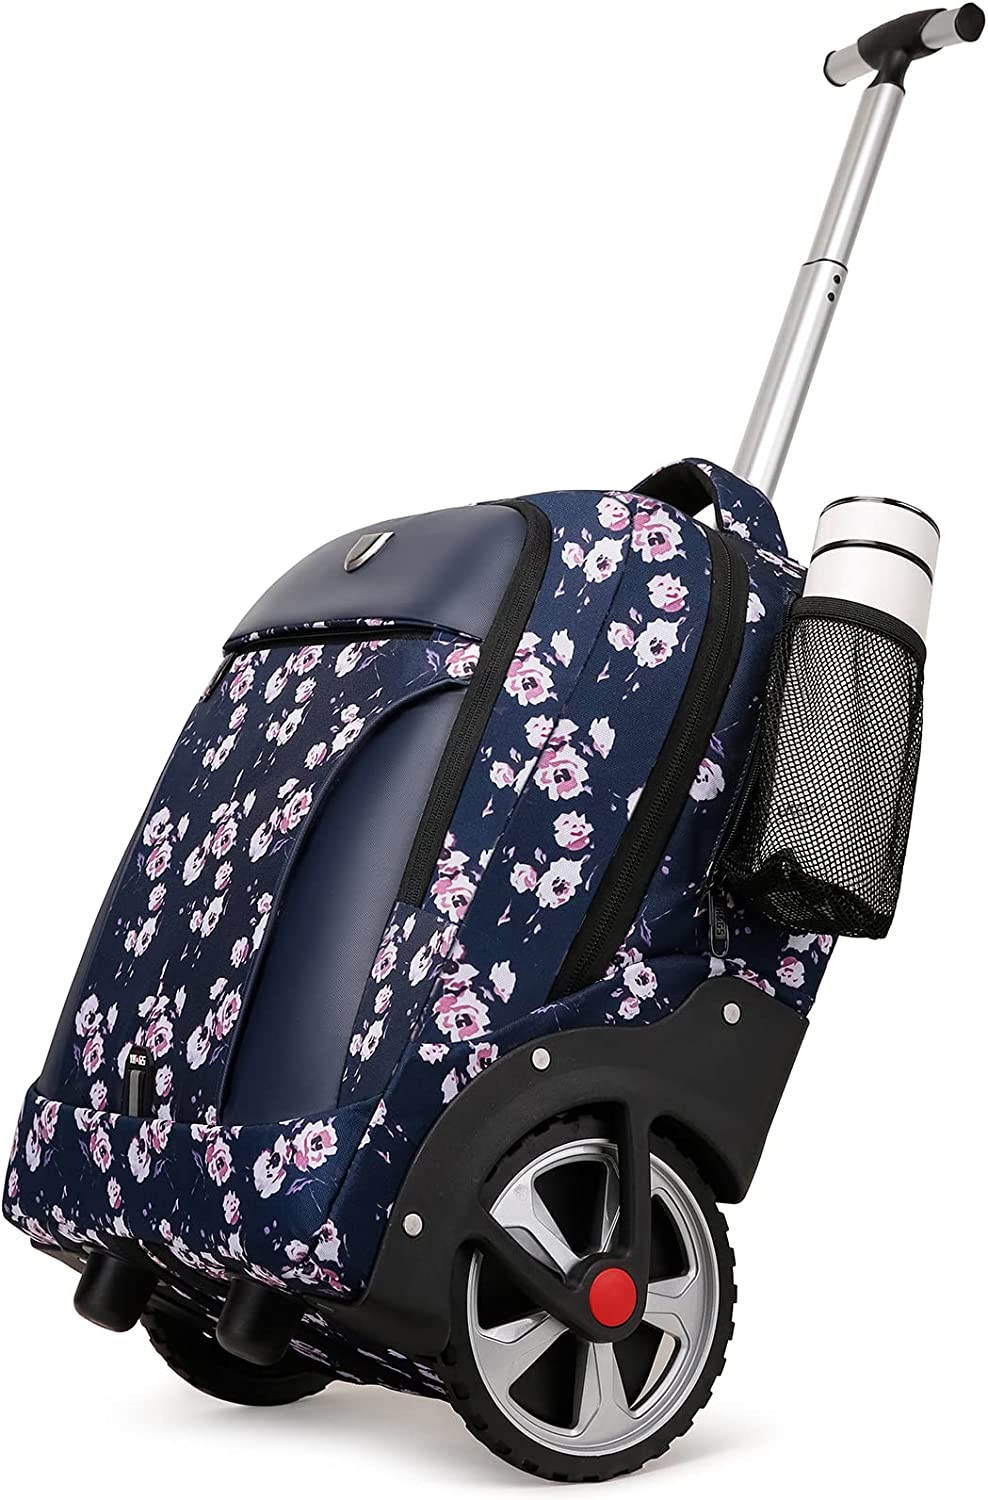 YH&GS Rolling Backpack Floral, Waterproof with Wheels for Business, College Student and Travel Commuter, Carry on Laptop Compartment, Fit 17 Inch Laptop...